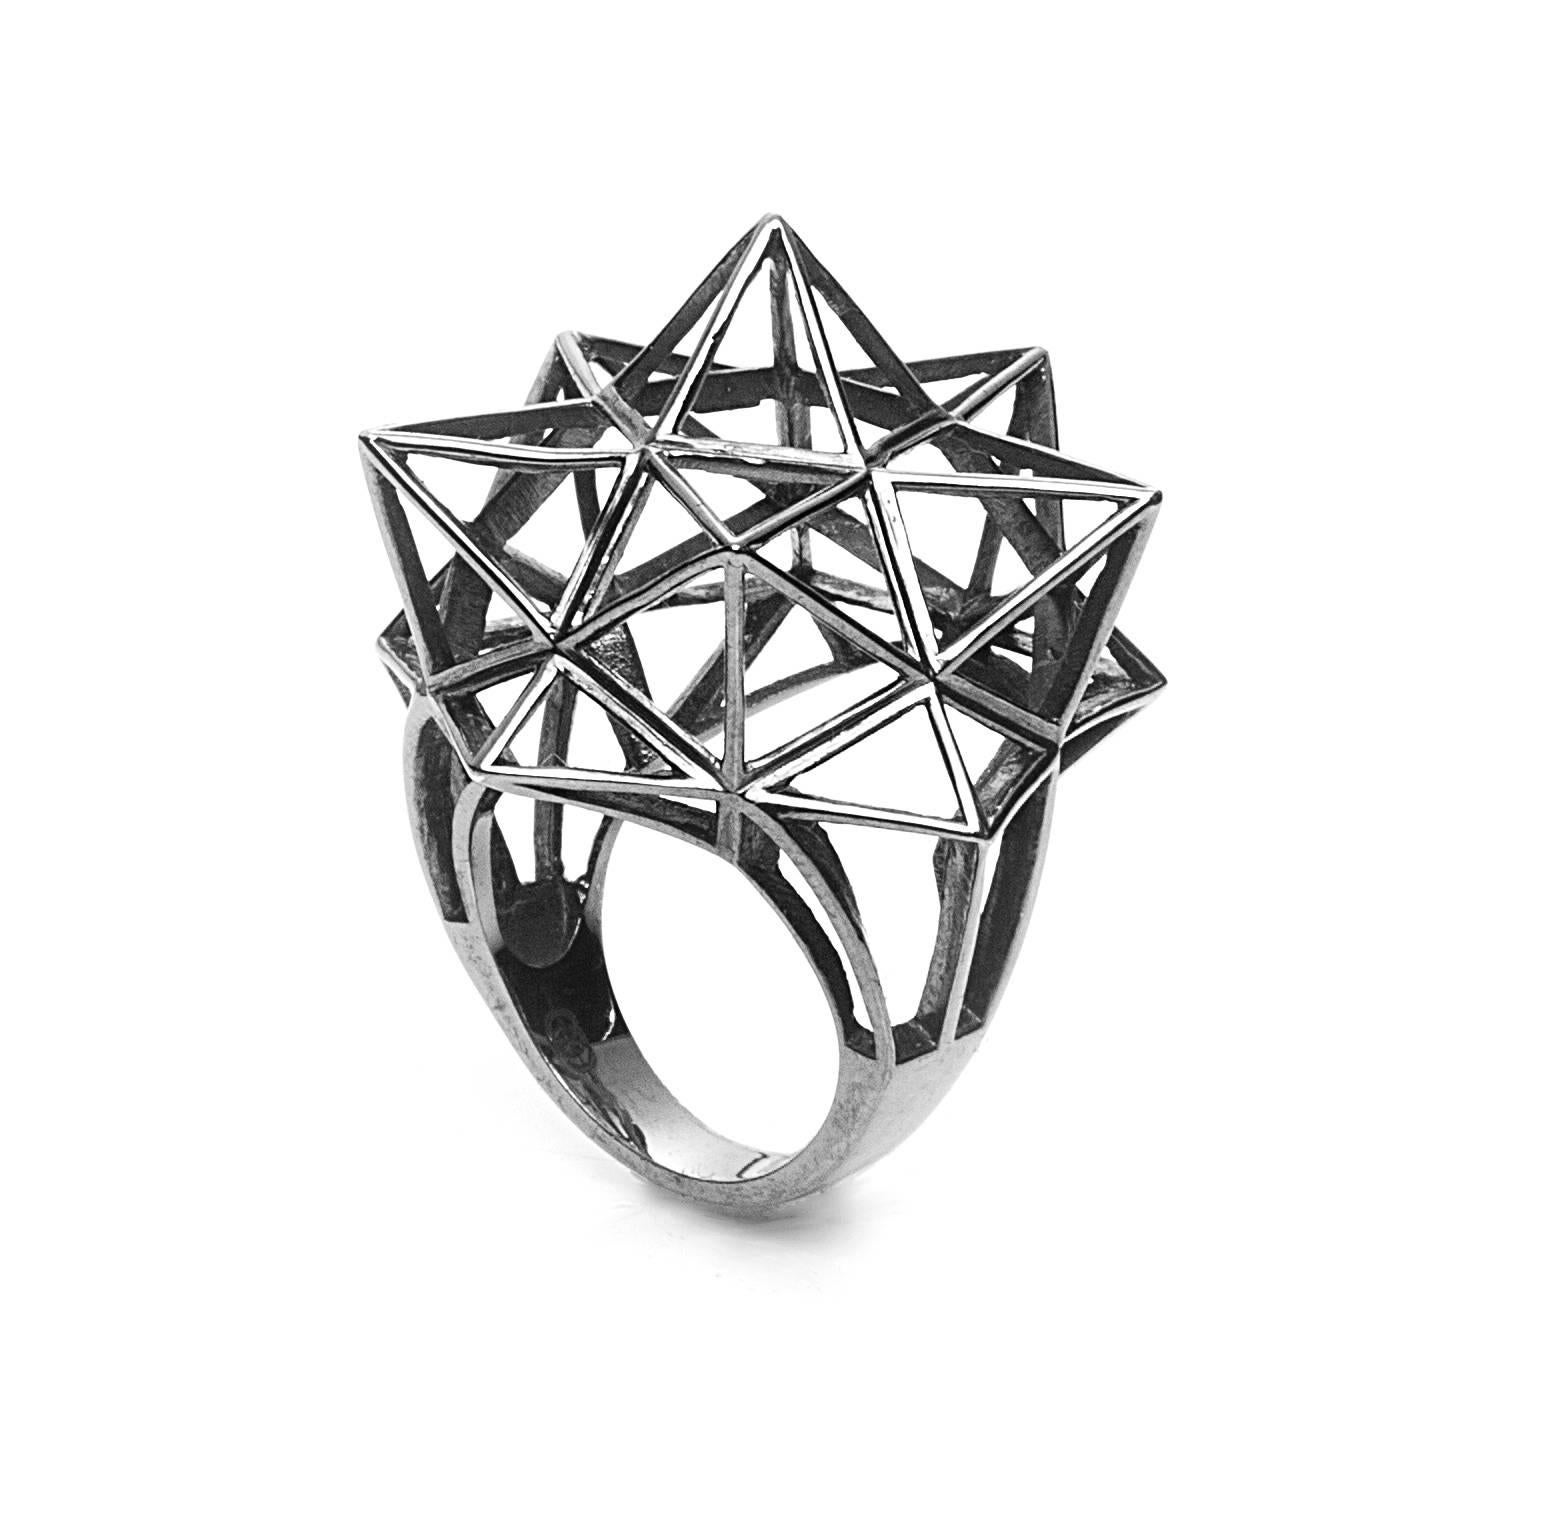 This Sterling Silver Framework Star Ring is a statement of strength and power. Designer John Brevard used principles of sacred geometry to design this ring for optimal strength and energy-capture. This piece is limited edition and designed for the